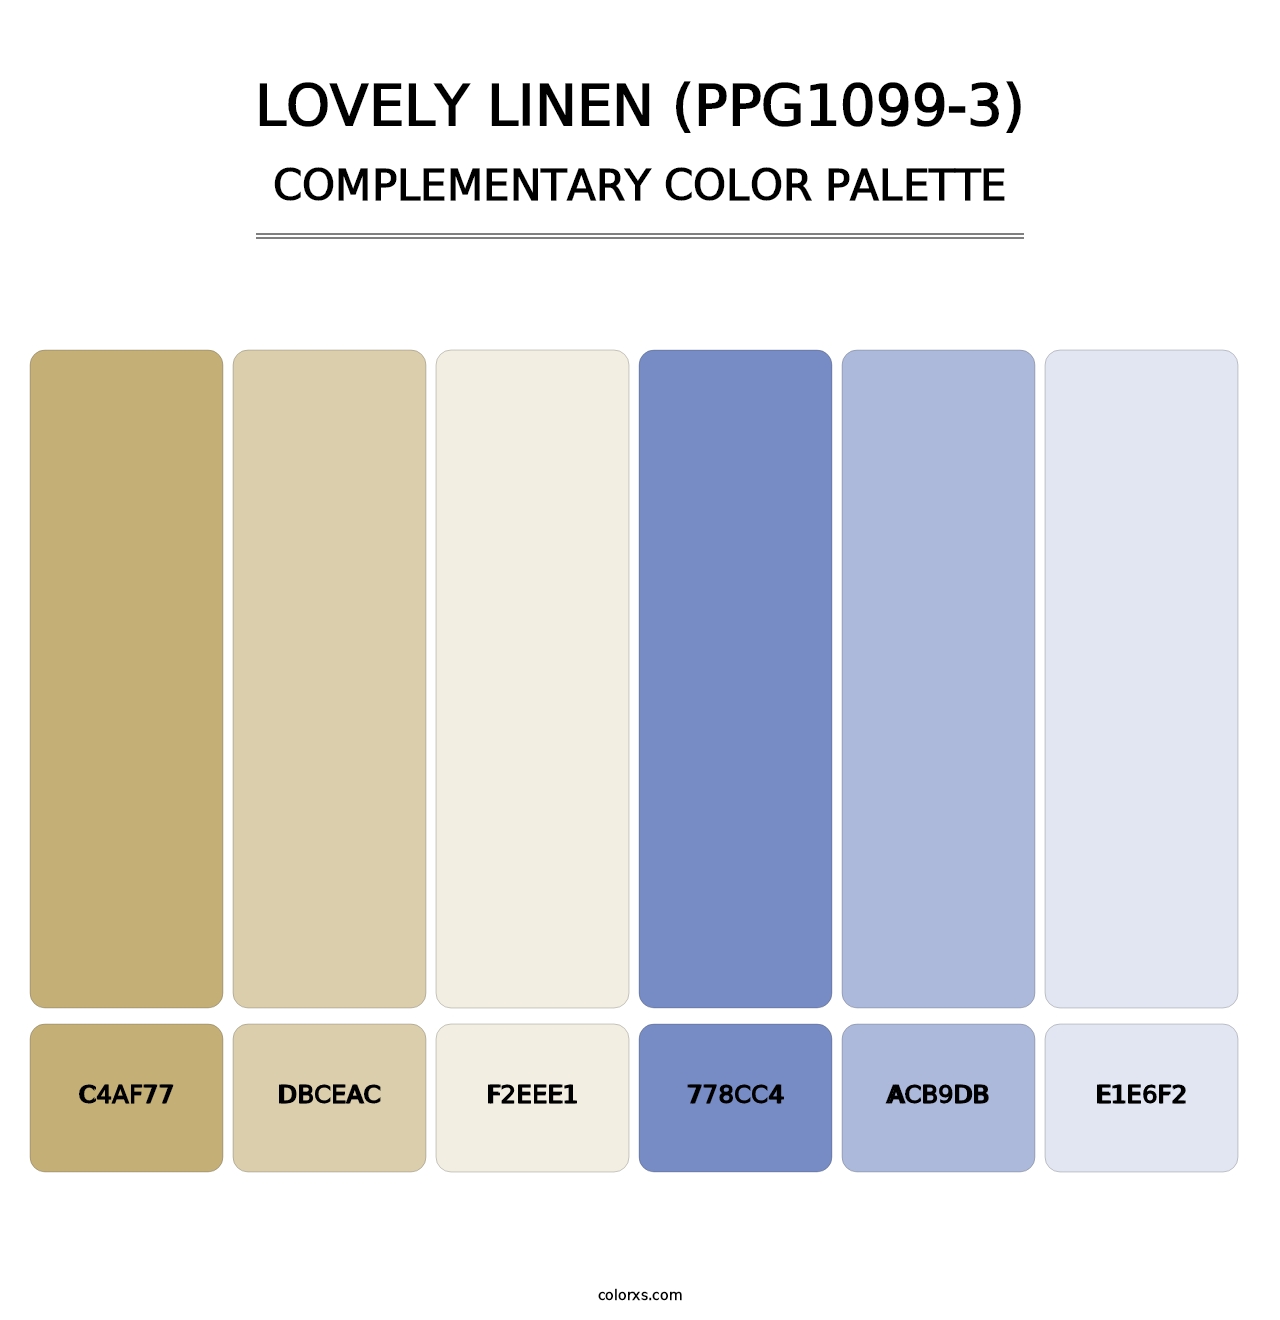 Lovely Linen (PPG1099-3) - Complementary Color Palette